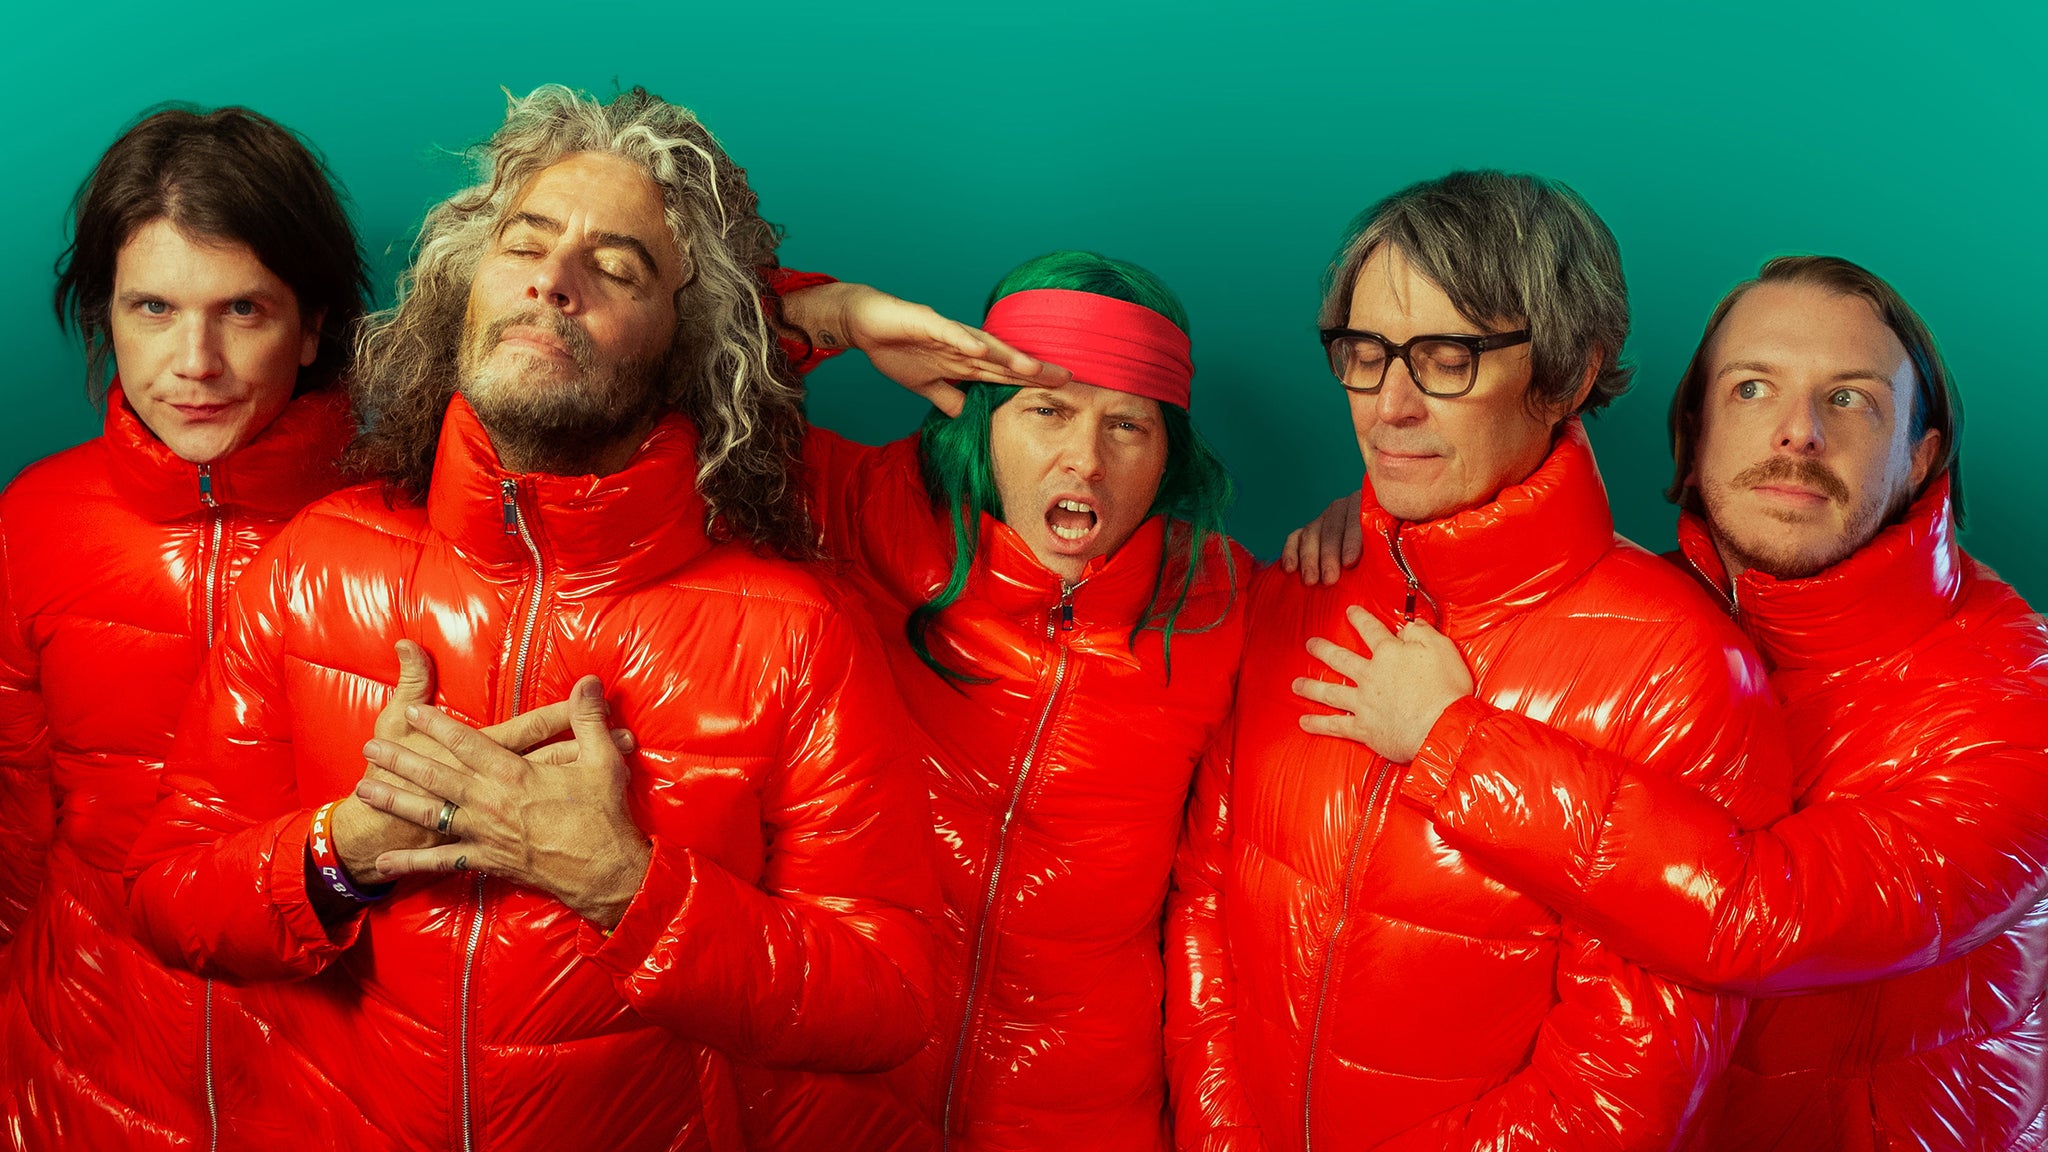 The Flaming Lips perform Yoshimi Battles the Pink Robots